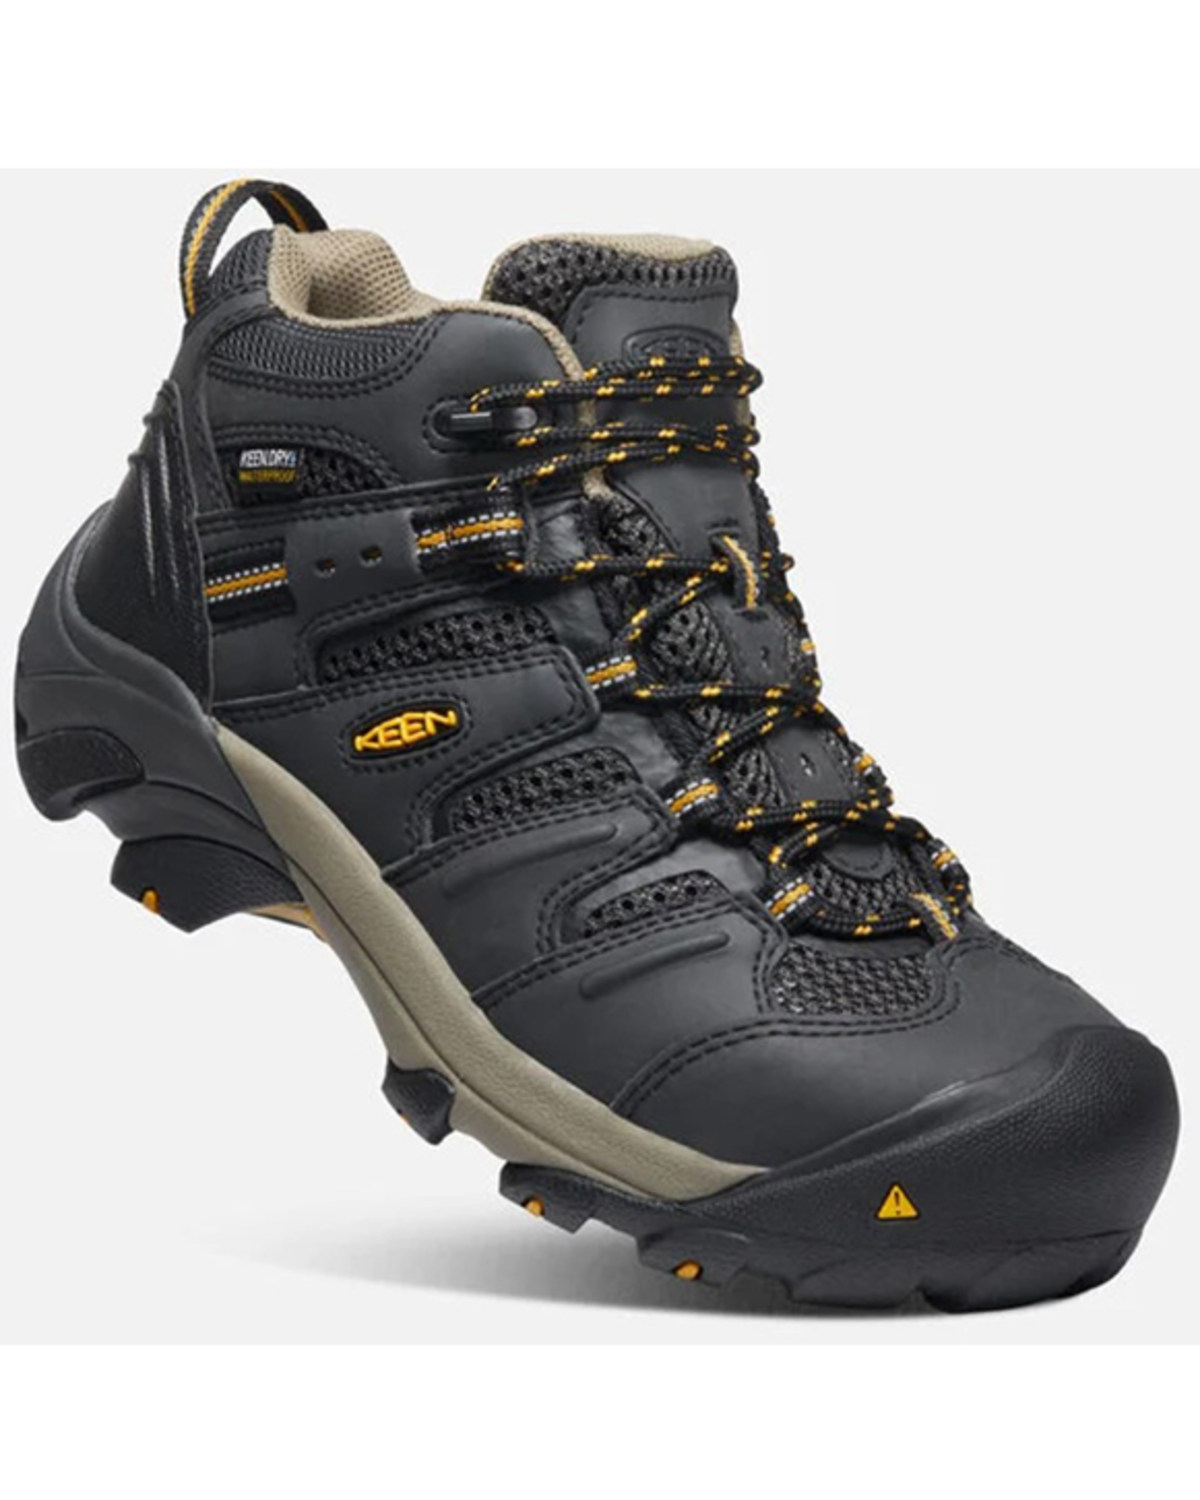 Keen Women's Lansing Mid Lace-Up Work Hiking Boots - Steel Toe